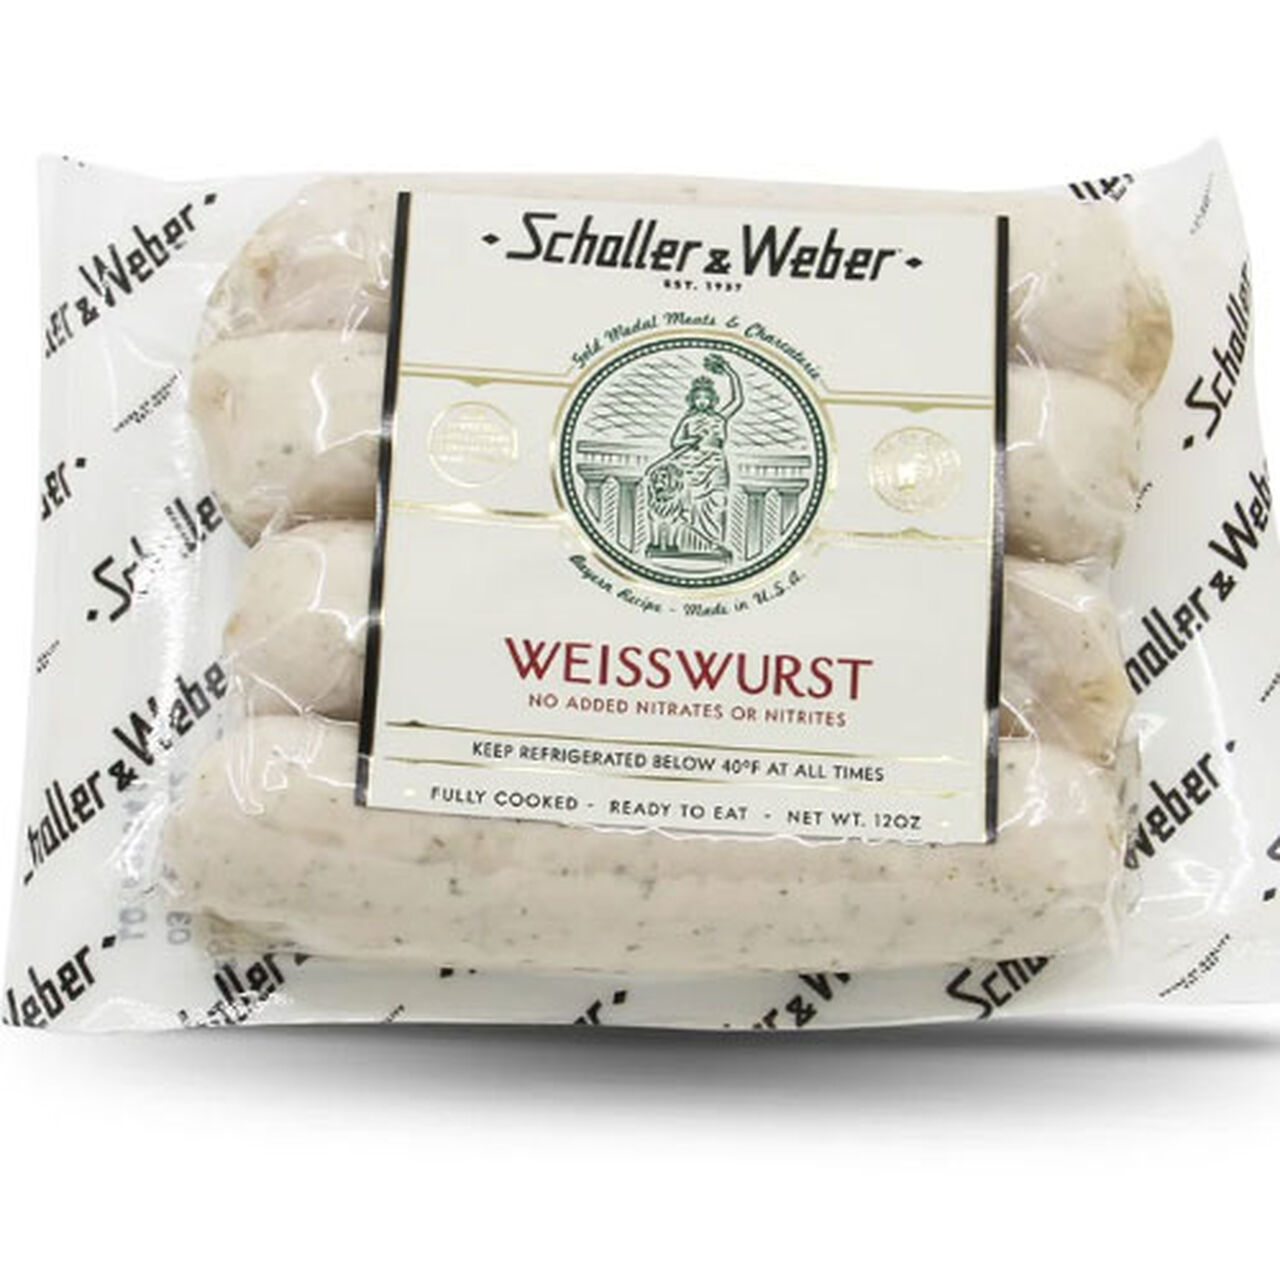 Schaller & Weber Weisswurst fully cooked 12oz  large image number 0